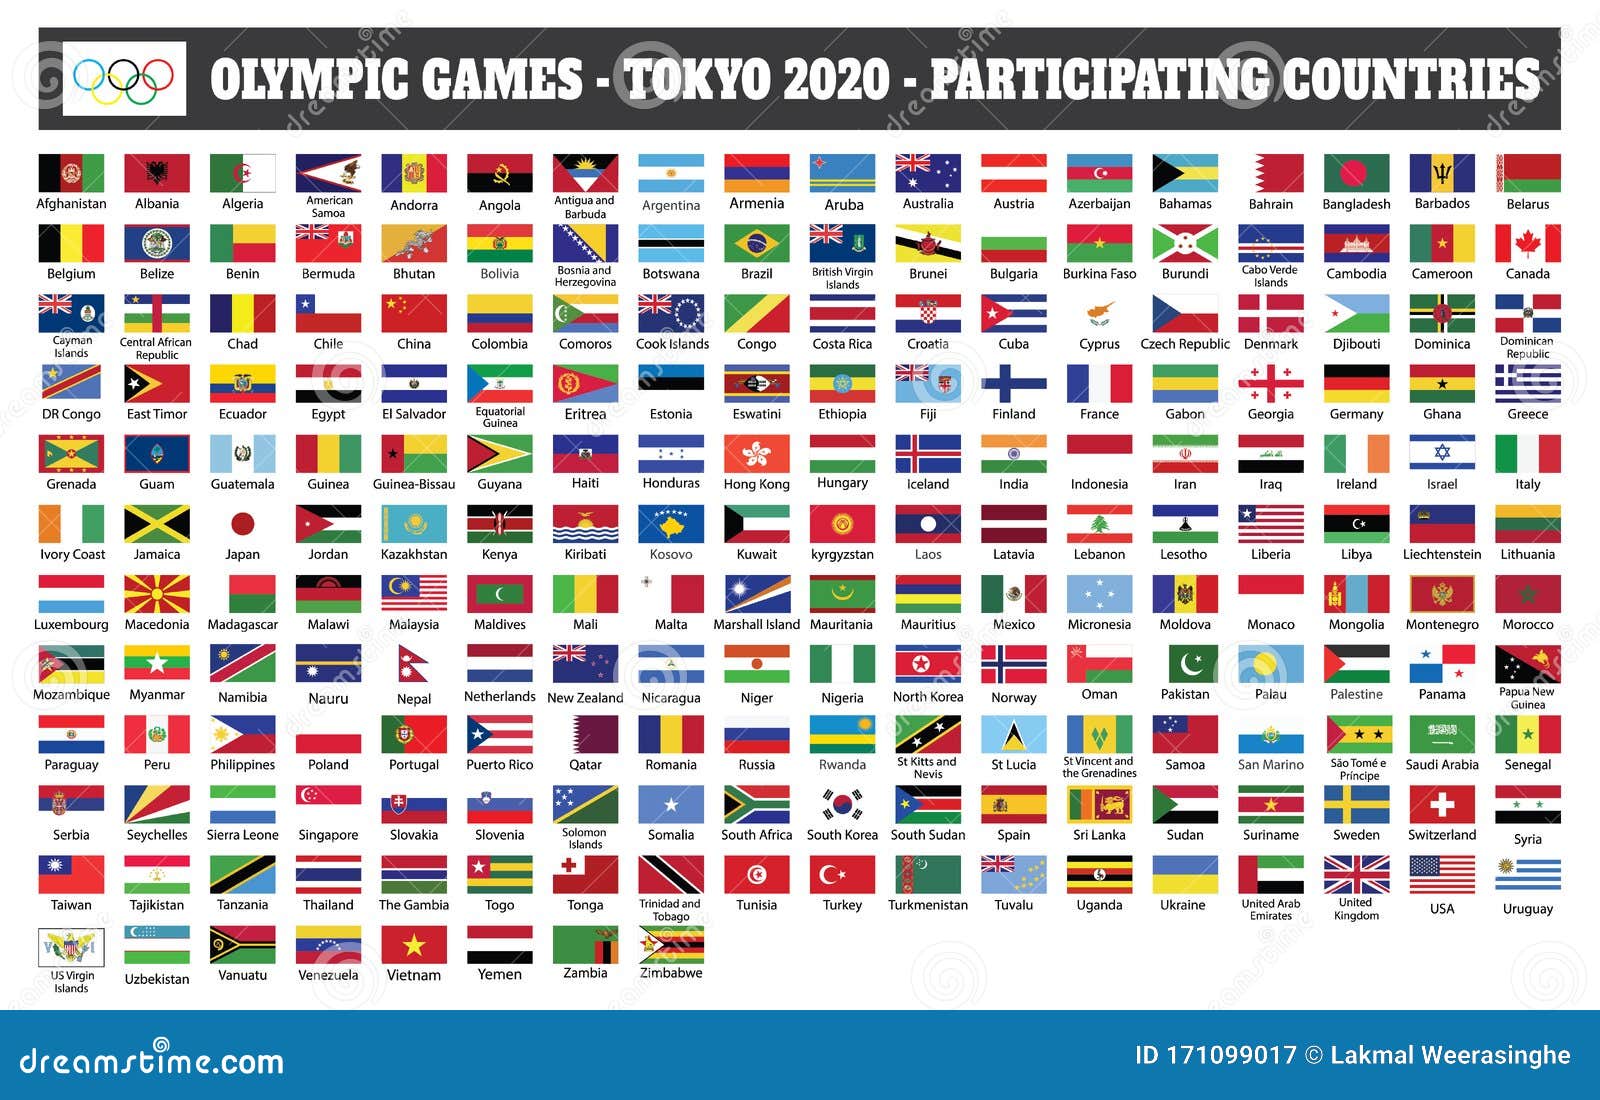 olympic games tokyo 2020 schedule